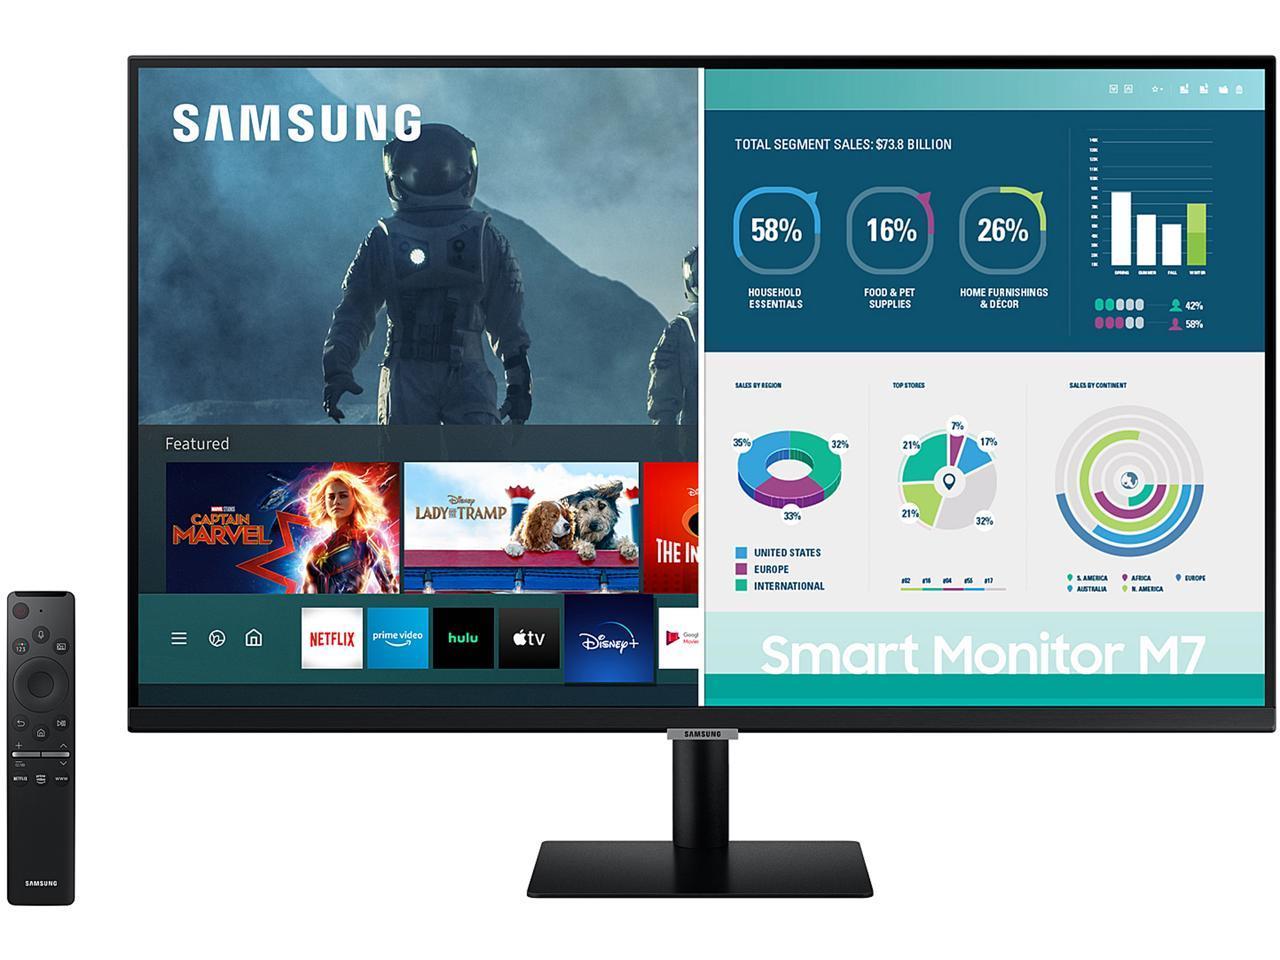 Samsung M7 Series 32M70A 32in Built-in Speakers Smart Monitor for $249.99 Shipped